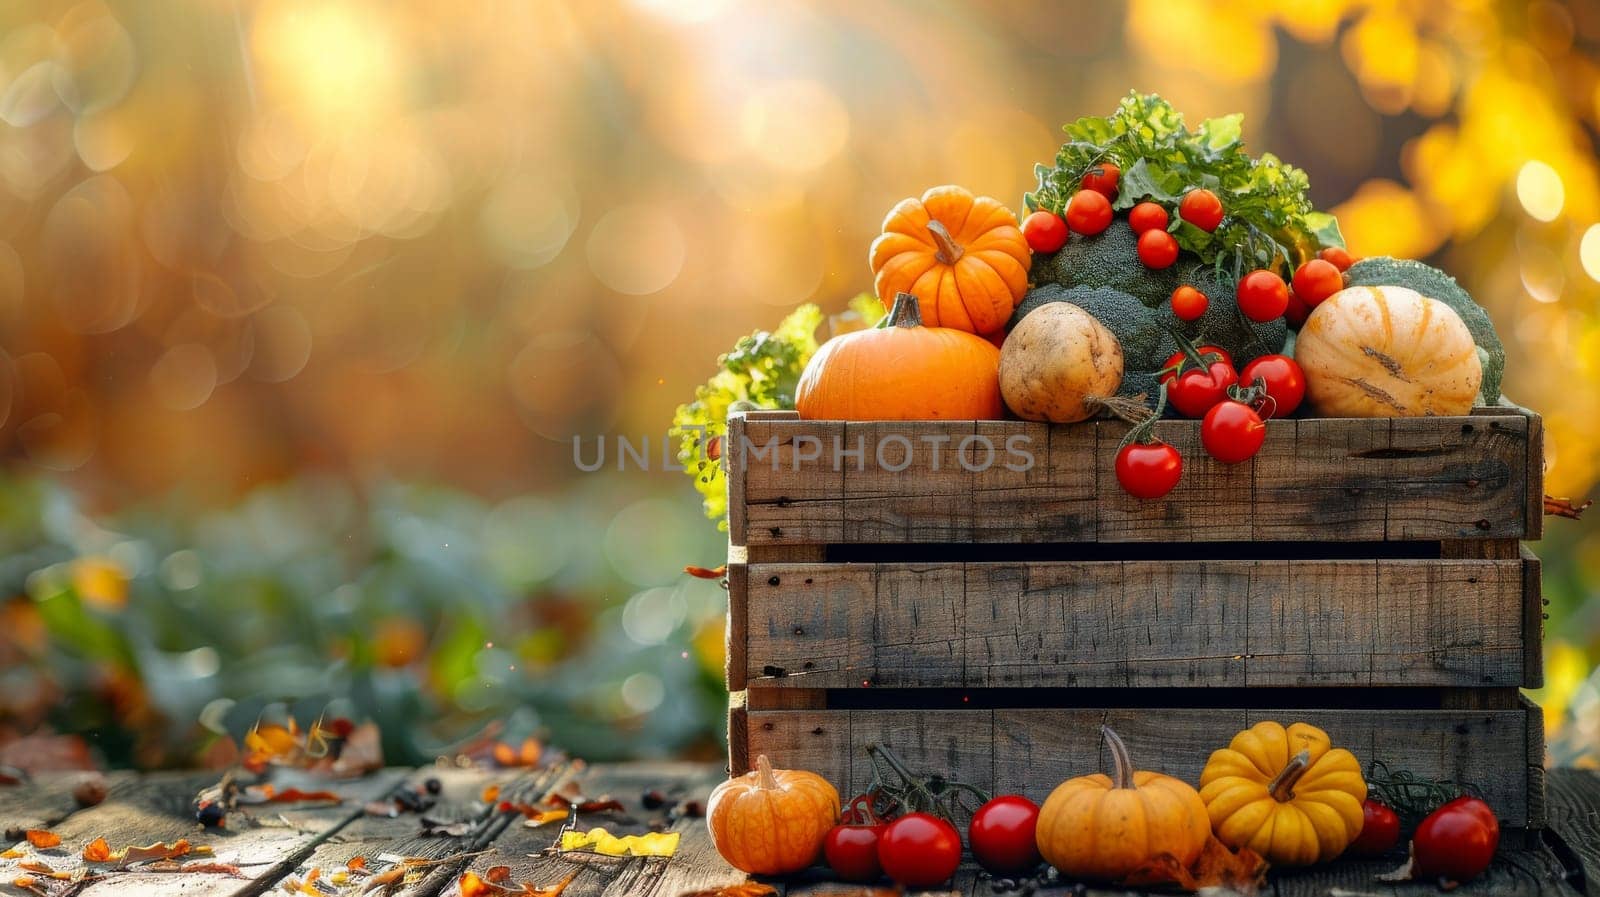 A woman is holding a basket of vegetables, including tomatoes, broccoli, and carrots. The basket is placed on her lap, and she is in a garden setting. Concept of freshness and abundance